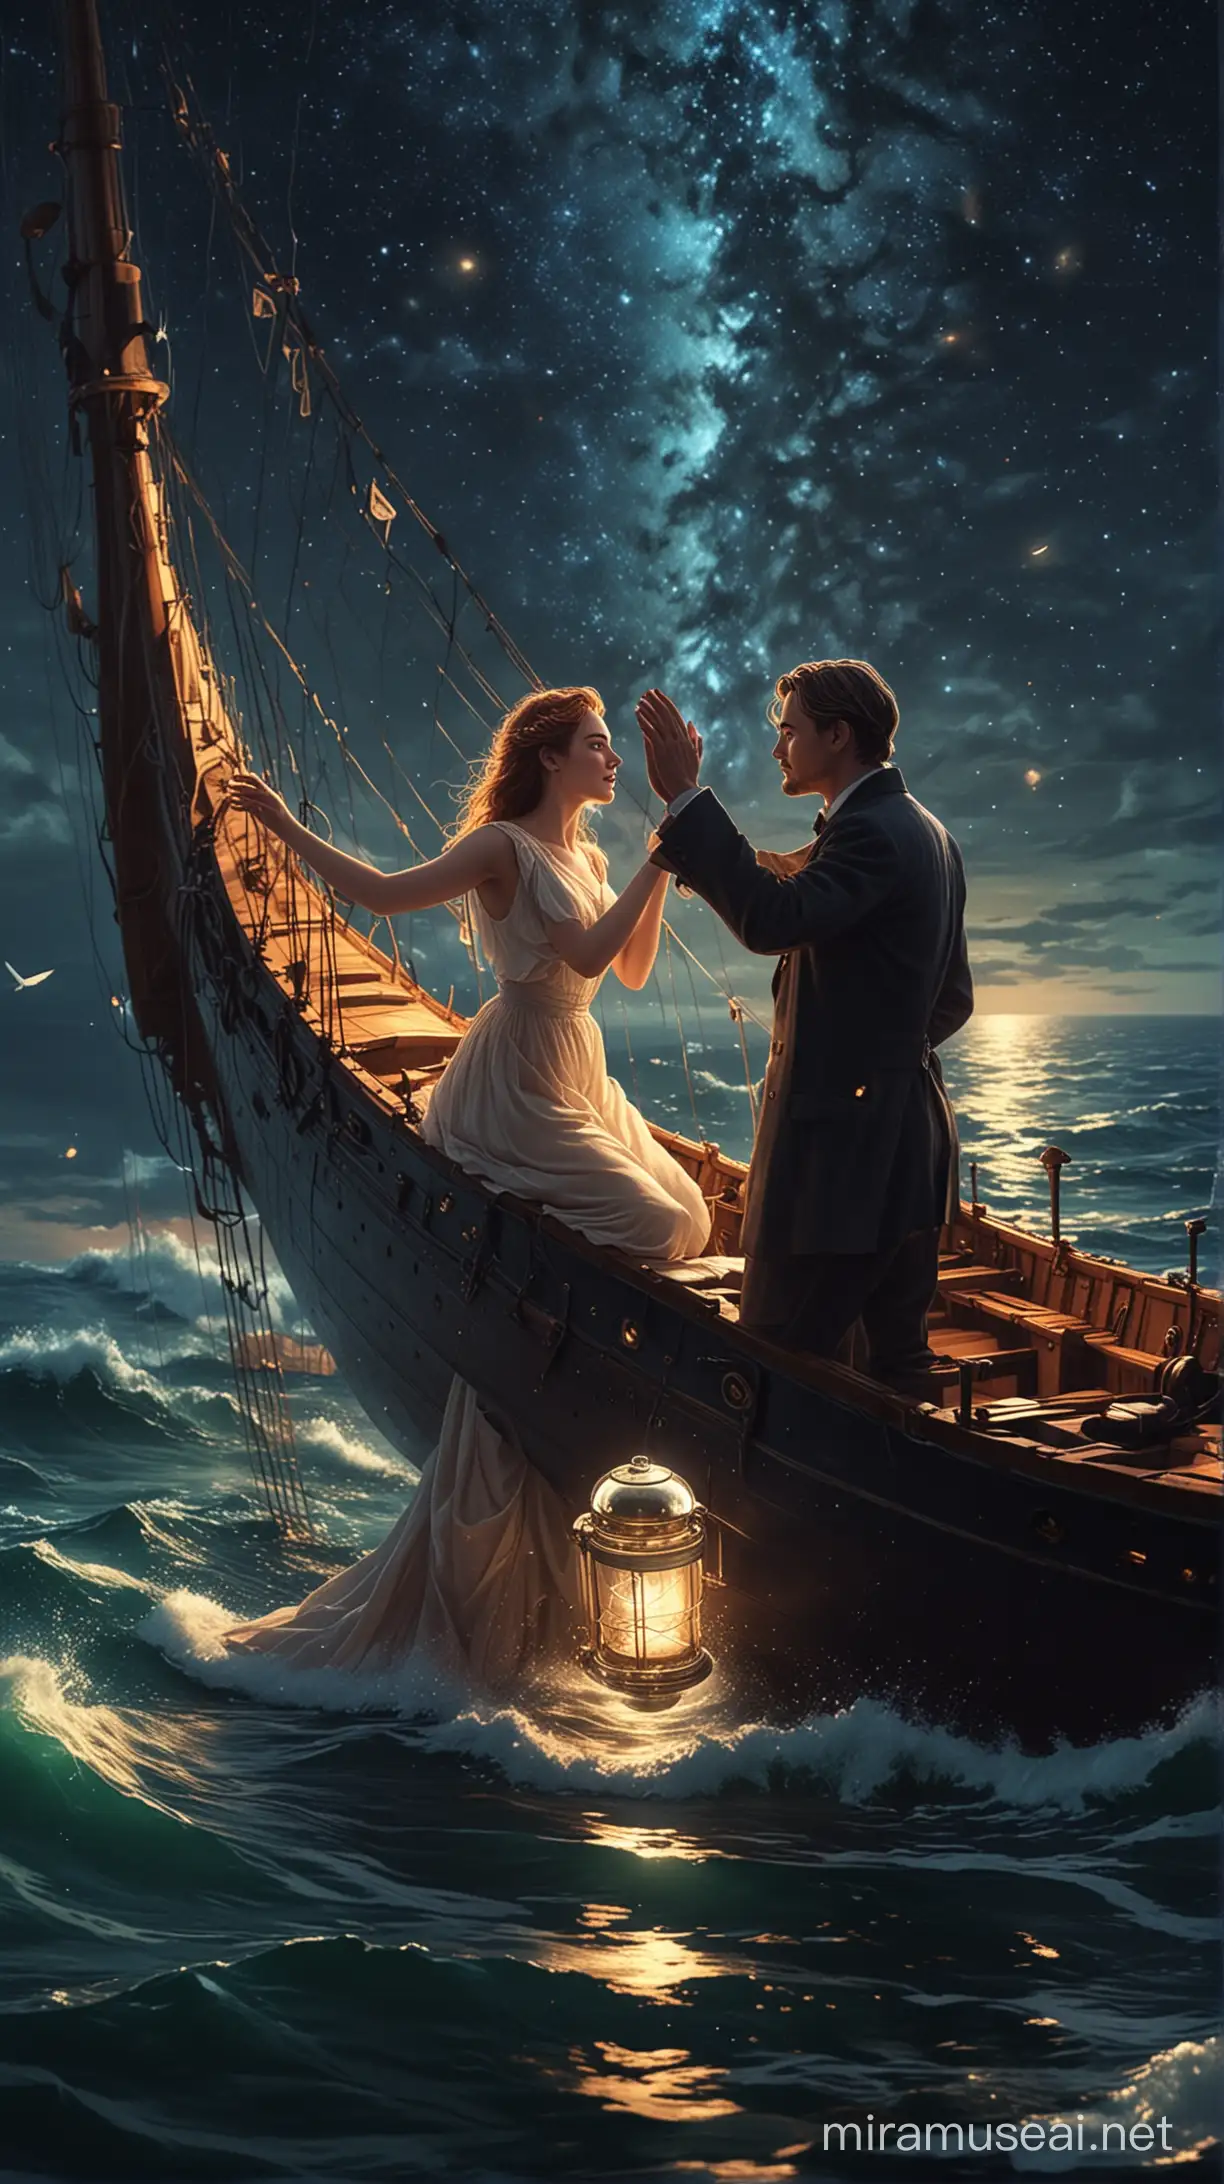 "Love Under the Stars: Rose and Jack aboard the Titanic" This art poster unfolds an eternal story of love and destiny.  In the soft light of the starry sky, similar to the paintings of Van Gogh, the huge ship Titanic floats.  Rose (with Face - Kate Winslet) and Jack (with Face-Leonardo Dicaprio) stand on board the ship, hand in hand, side by side, like two bright points in the ocean of time, their gazes intertwined like stars on the canvas of the night sky.  Raising their hands to the sky, they seem to live in their own little fairy tale, despite the sorrow and danger.  Tenderness, passion, romance and tragedy merge in this picture, forcing the viewer to forget about time and plunge into the world of their love.Digital painting, low poly, soft lighting, bird's eye view, isometric style, retro aesthetic, character oriented, 4K resolution, photorealistic rendering, using Cinema 4D